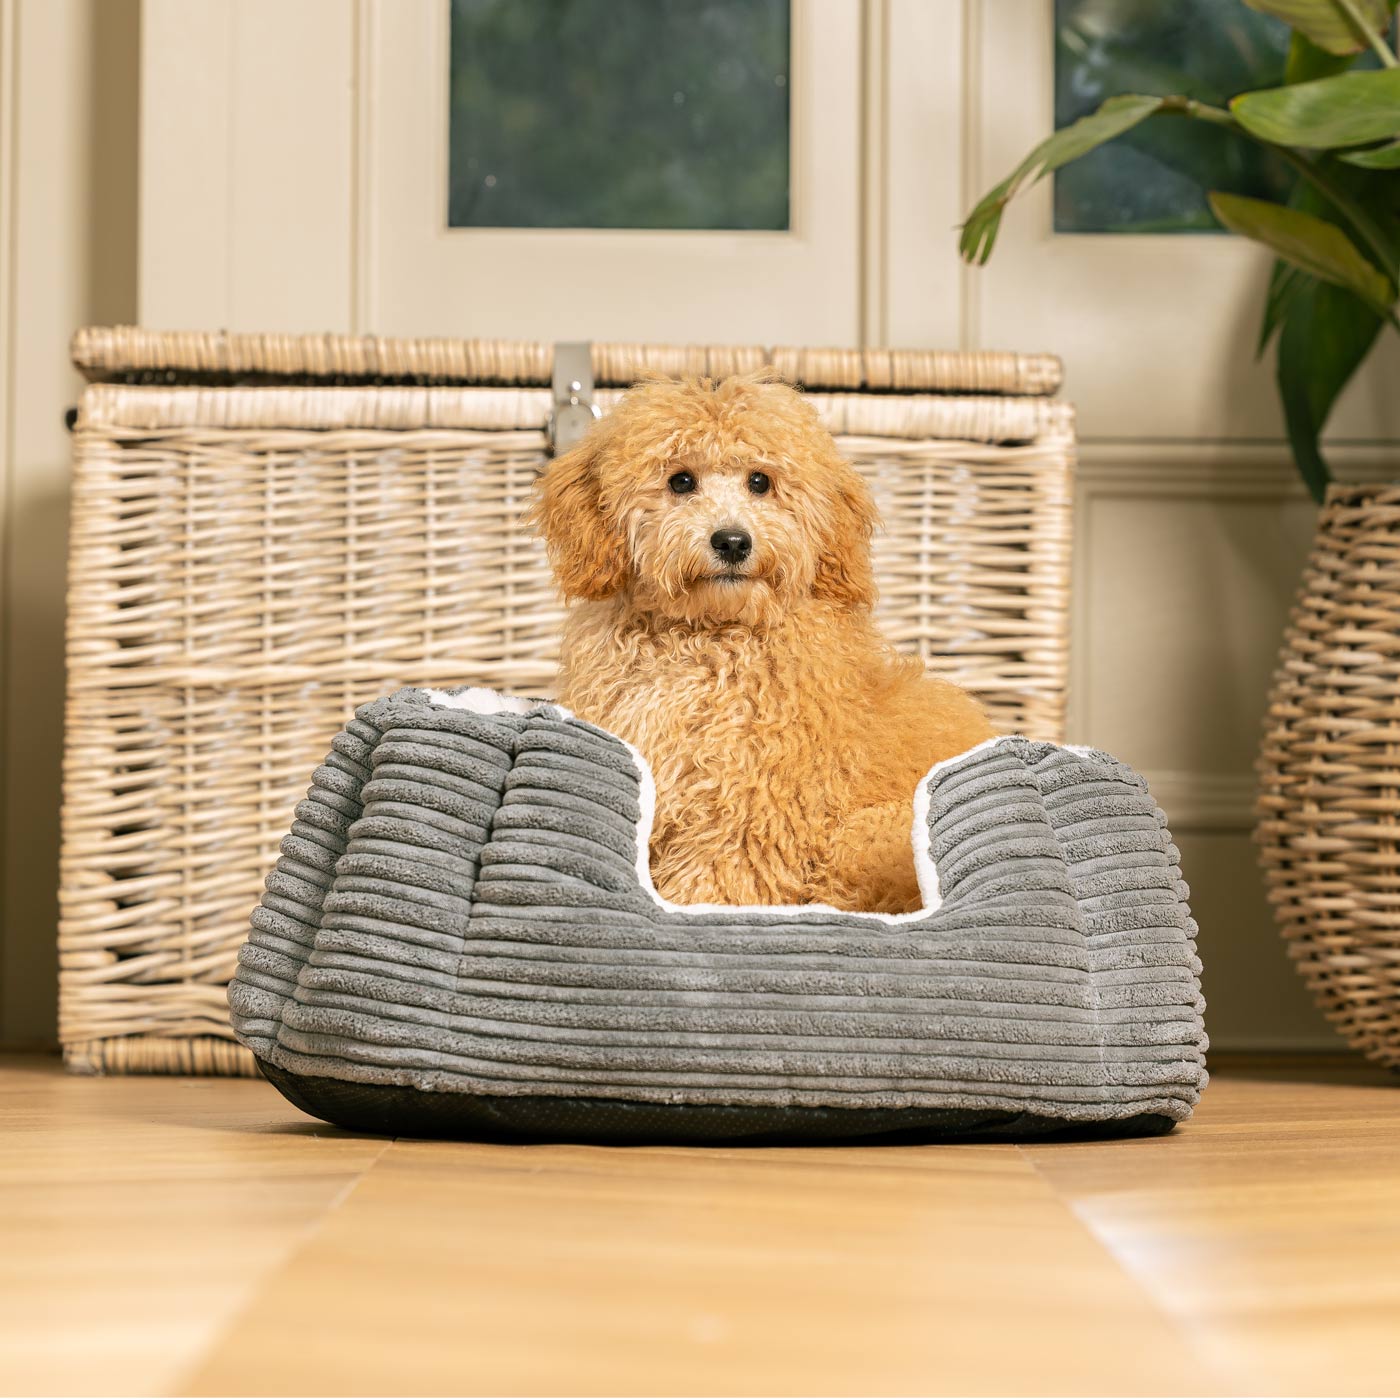 Discover Our Luxurious High Wall Bed For Dogs, Featuring inner pillow with plush teddy fleece on one side To Craft The Perfect Dog Bed In Stunning Essentials Dark Grey Plush! Available To Personalize Now at Lords & Labradors US